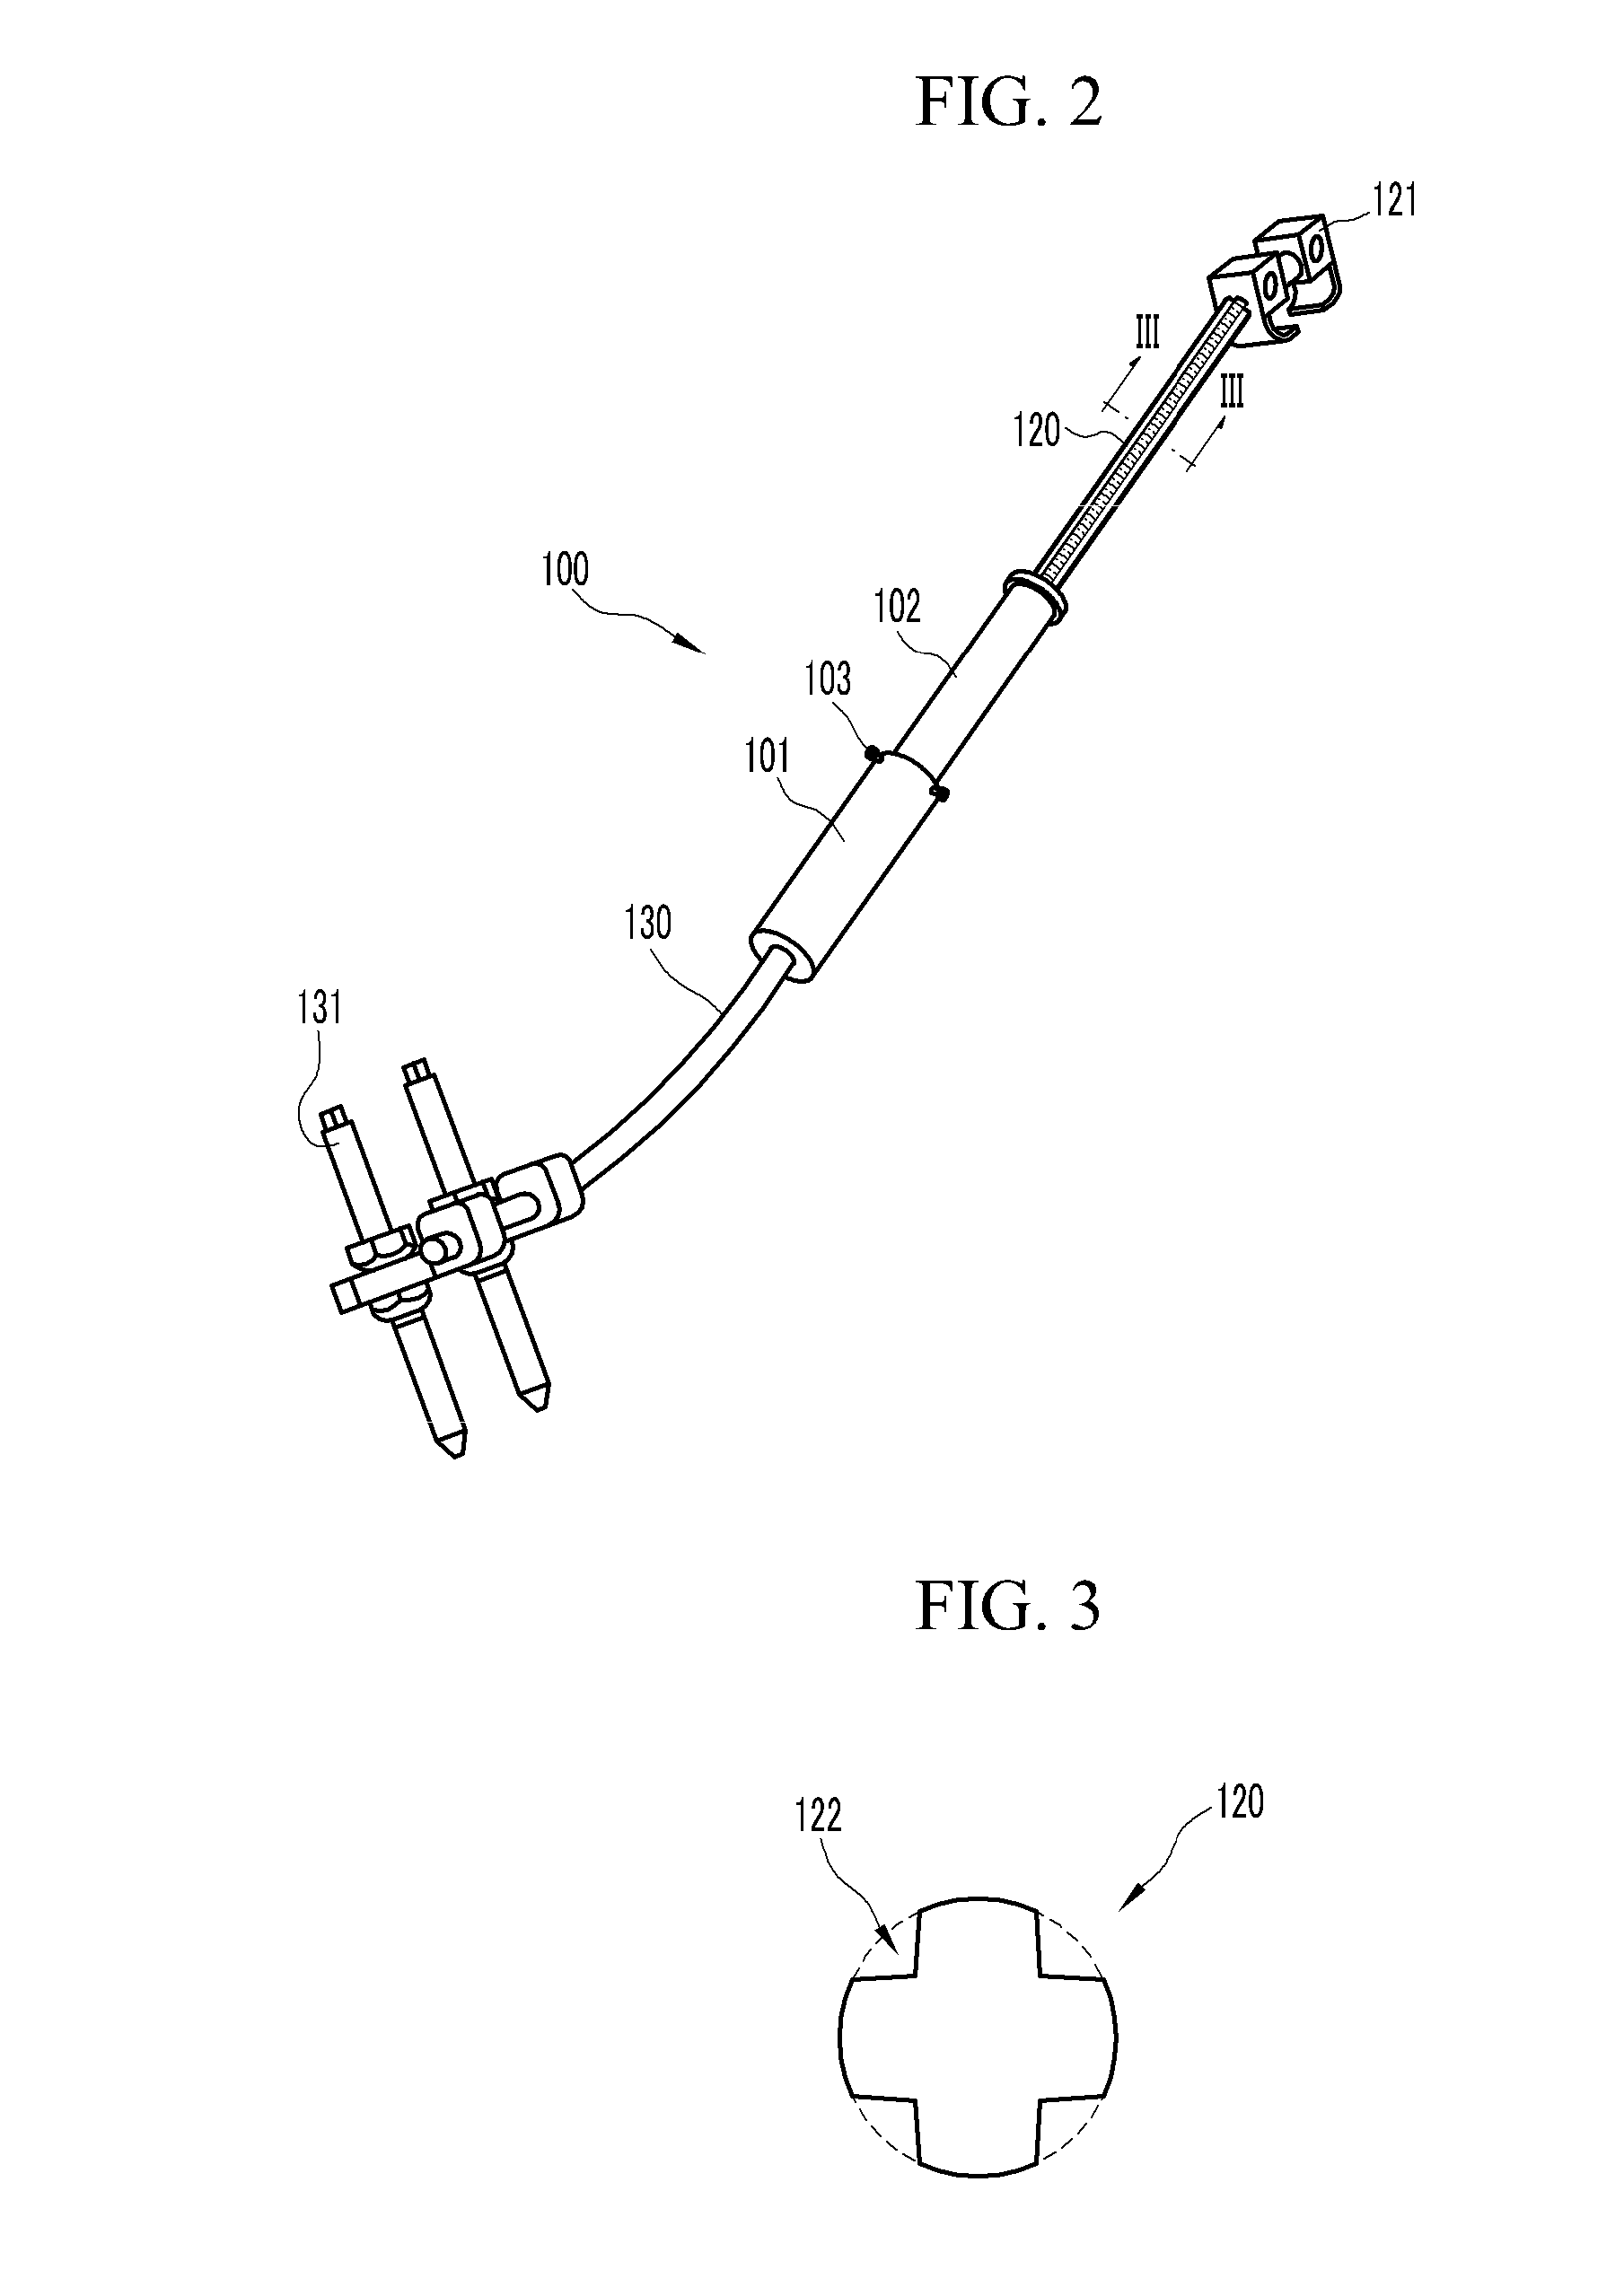 Reforming device